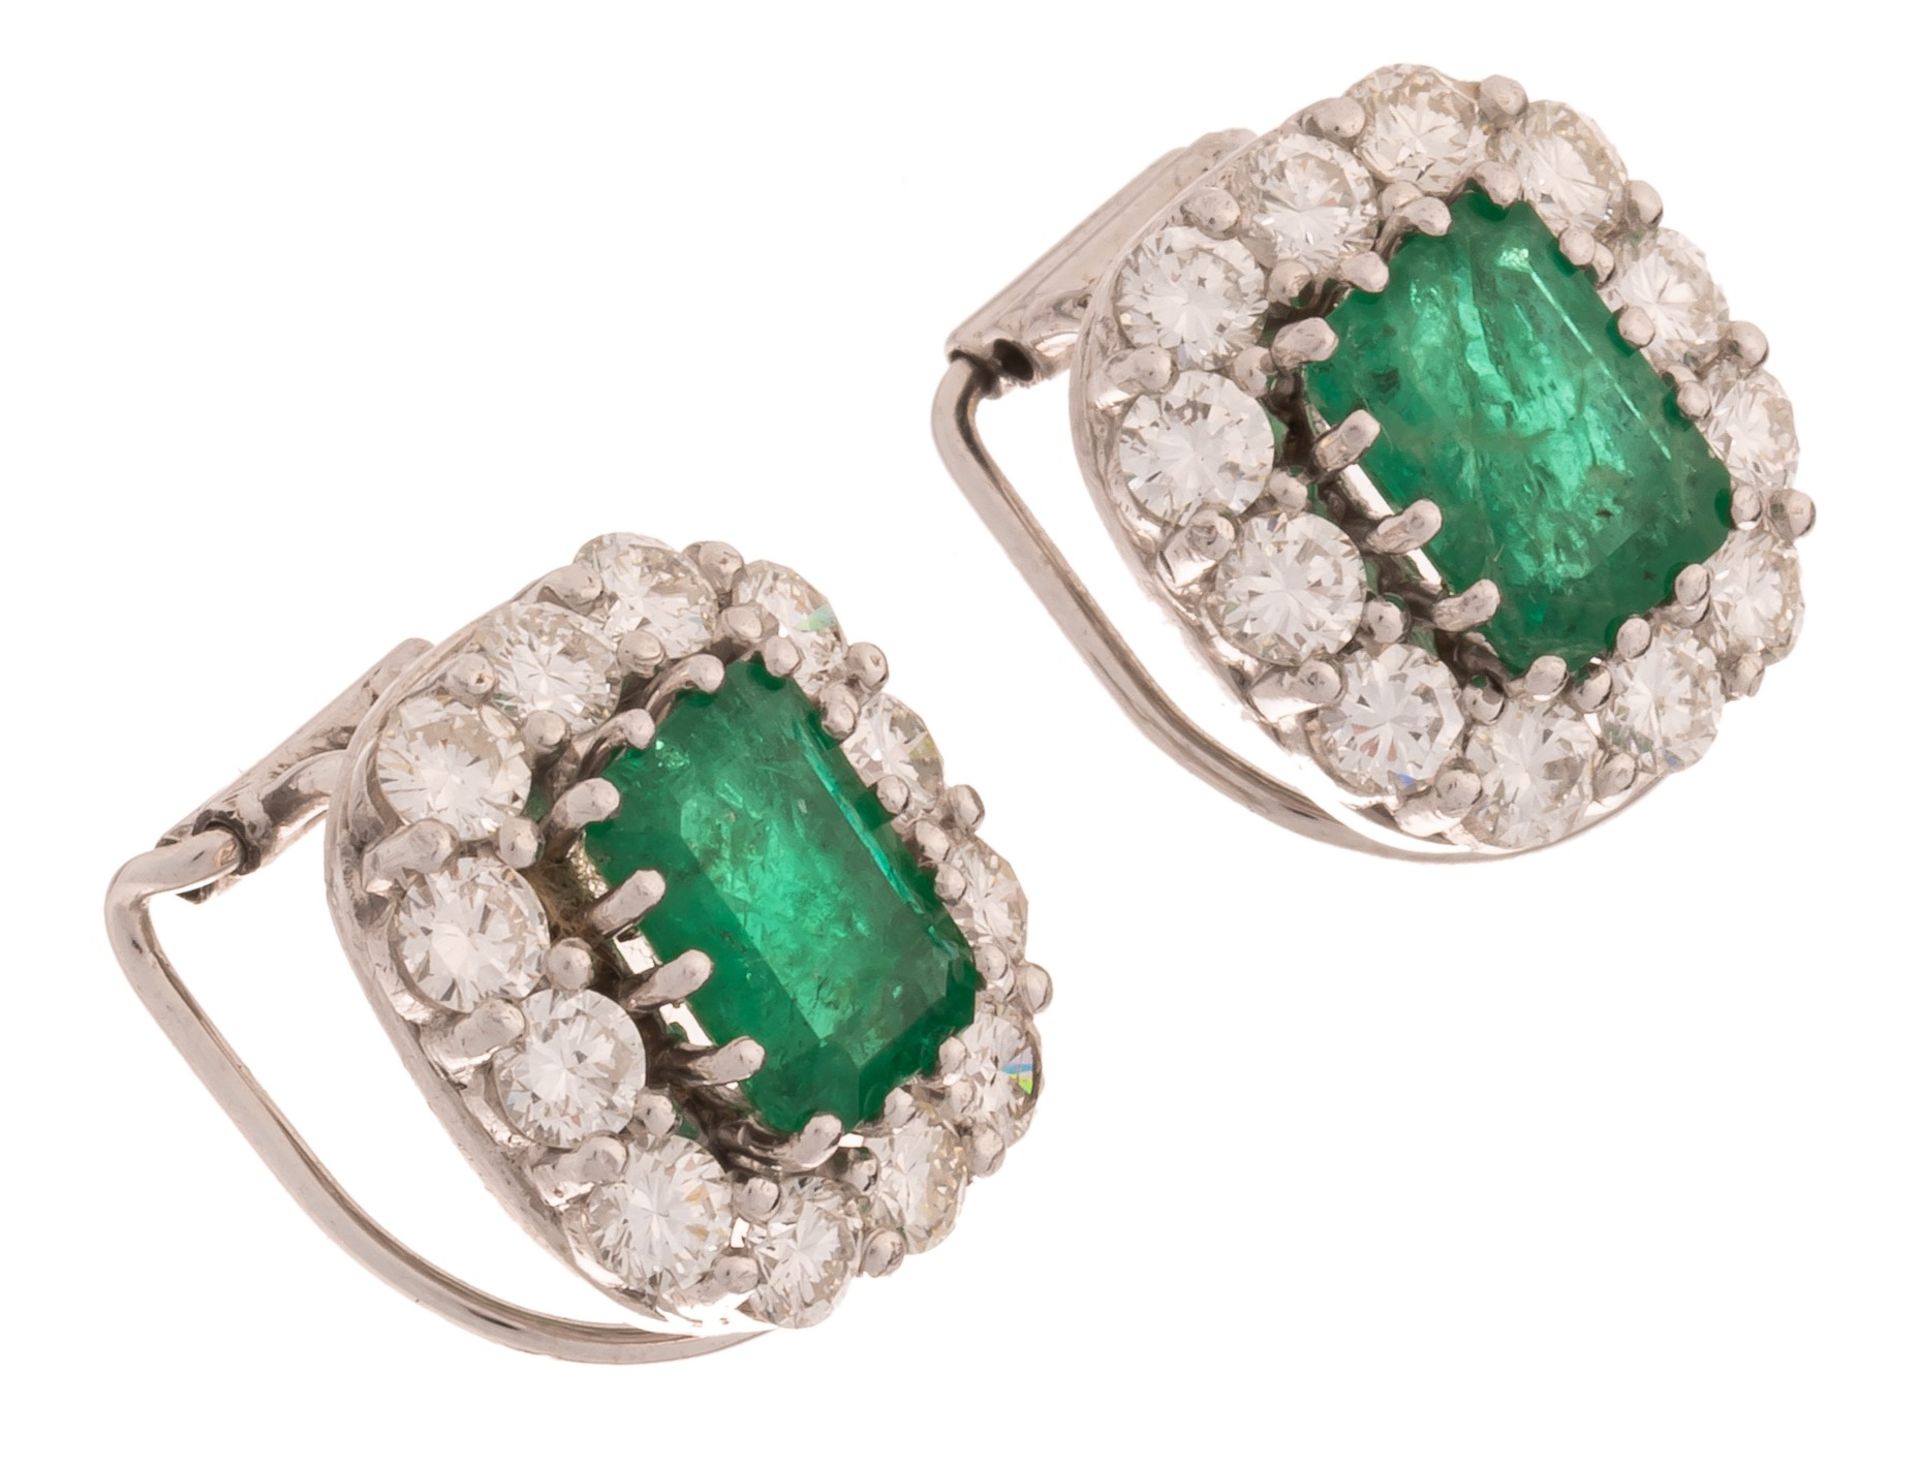 A pair of earrings in 18ct white gold, set with brilliant-cut diamonds and emeralds, 8,6 g